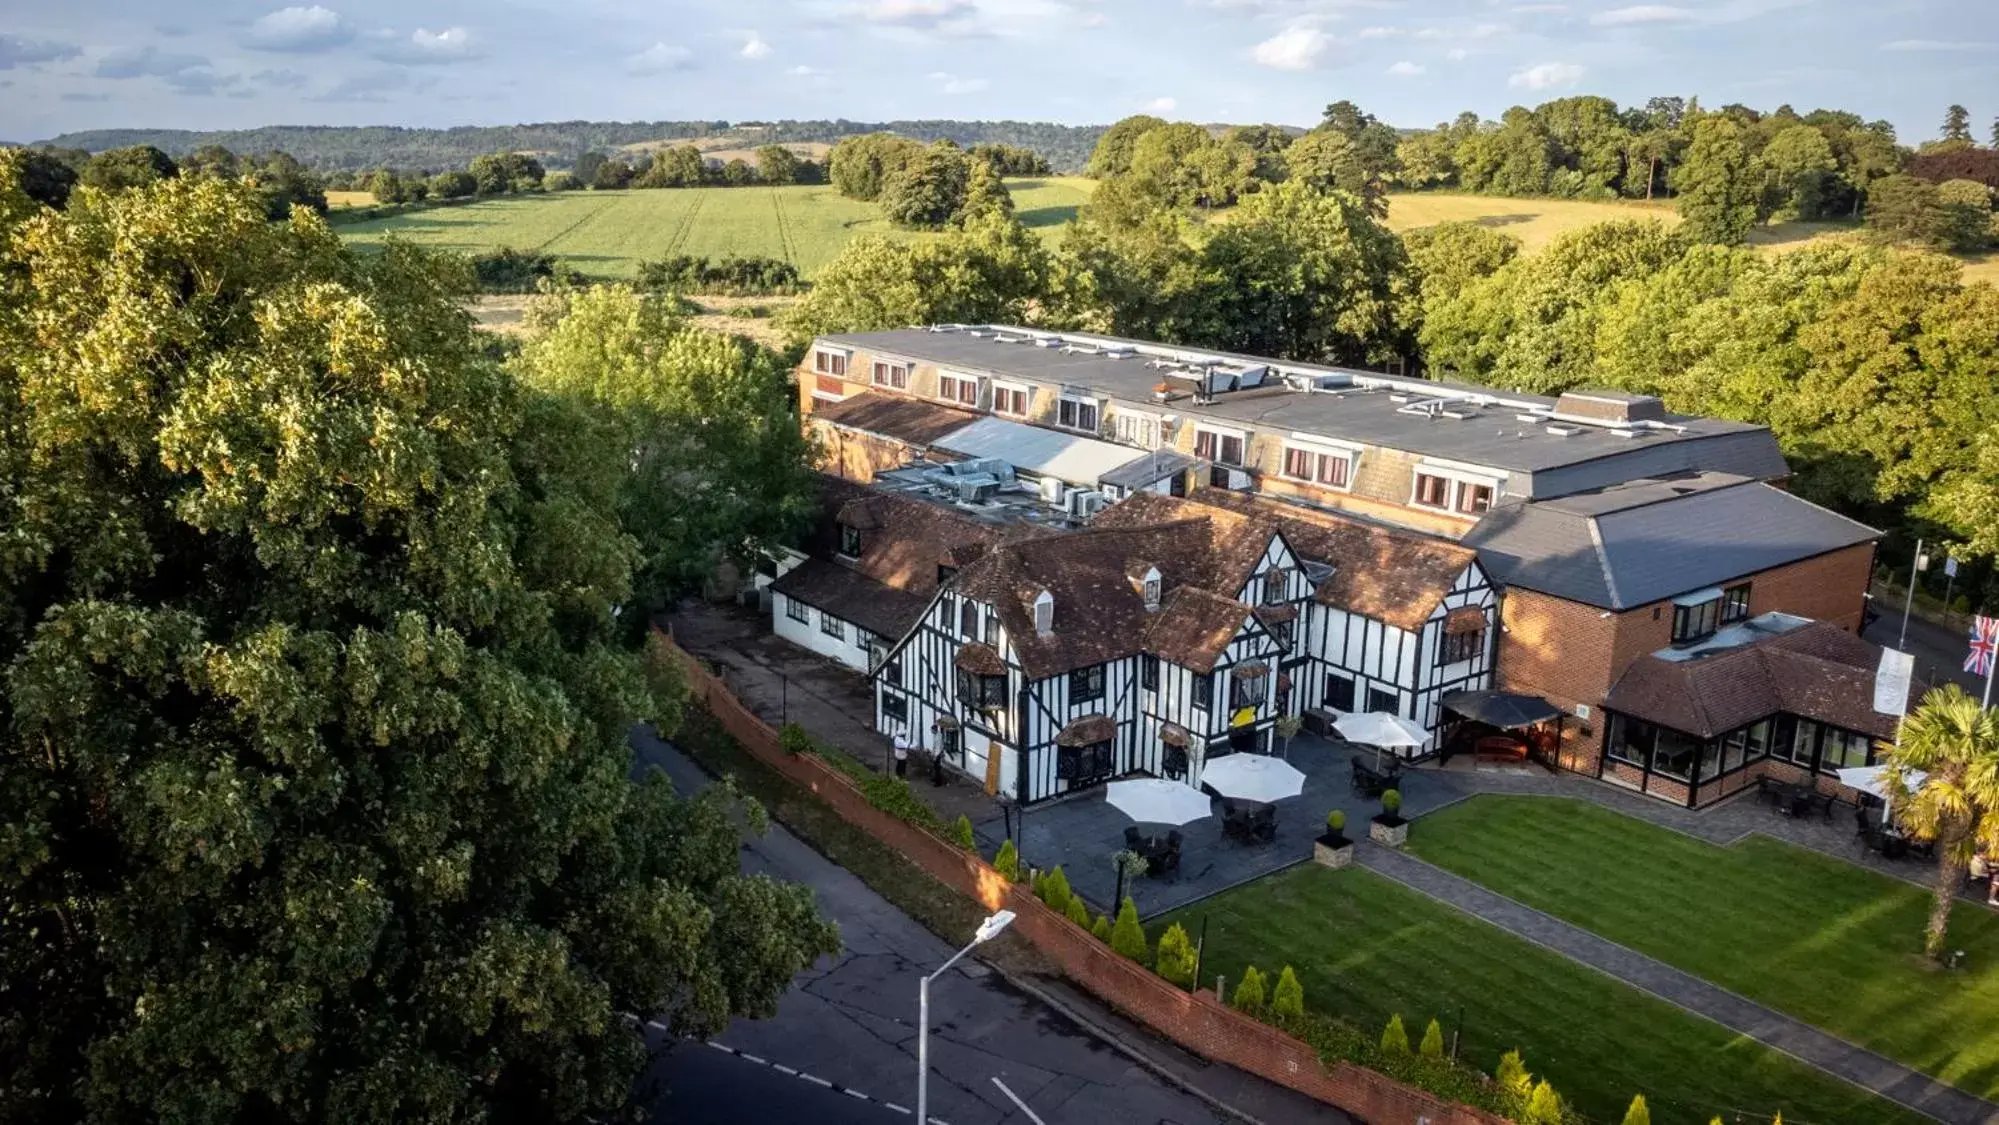 Property building, Bird's-eye View in Donnington Manor Hotel